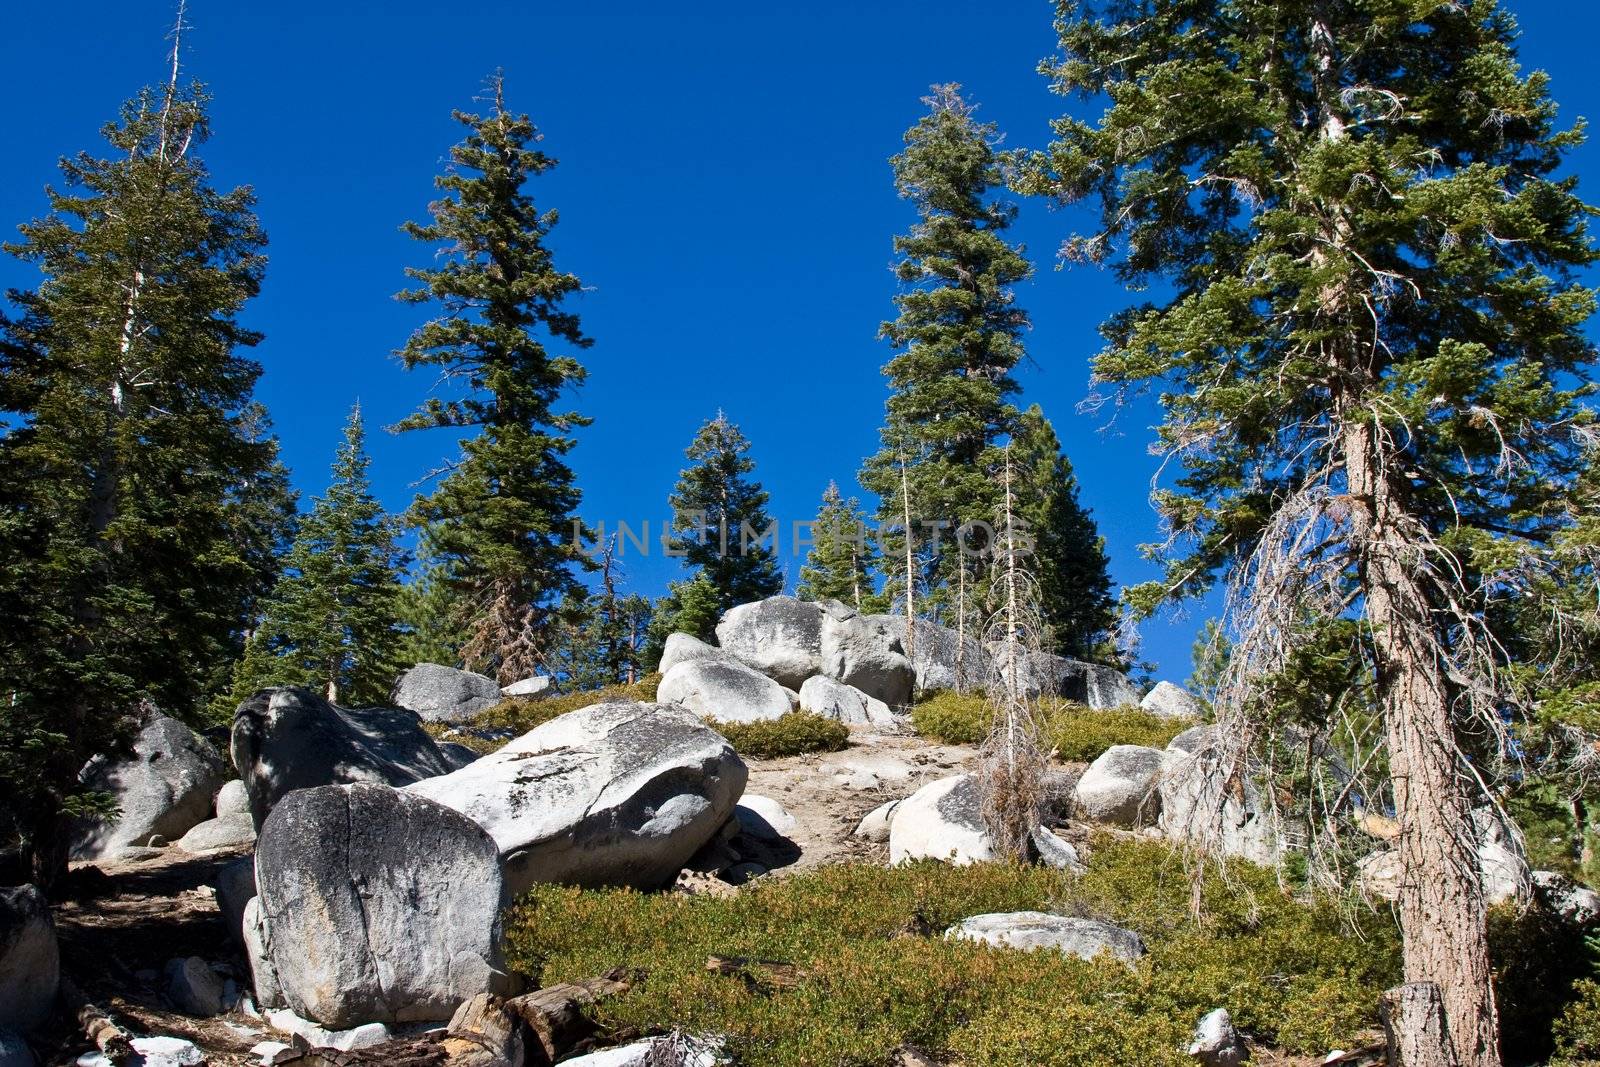 Side of mountain with rocks, boulders, trees and bushes against a bright cloudless blue sky